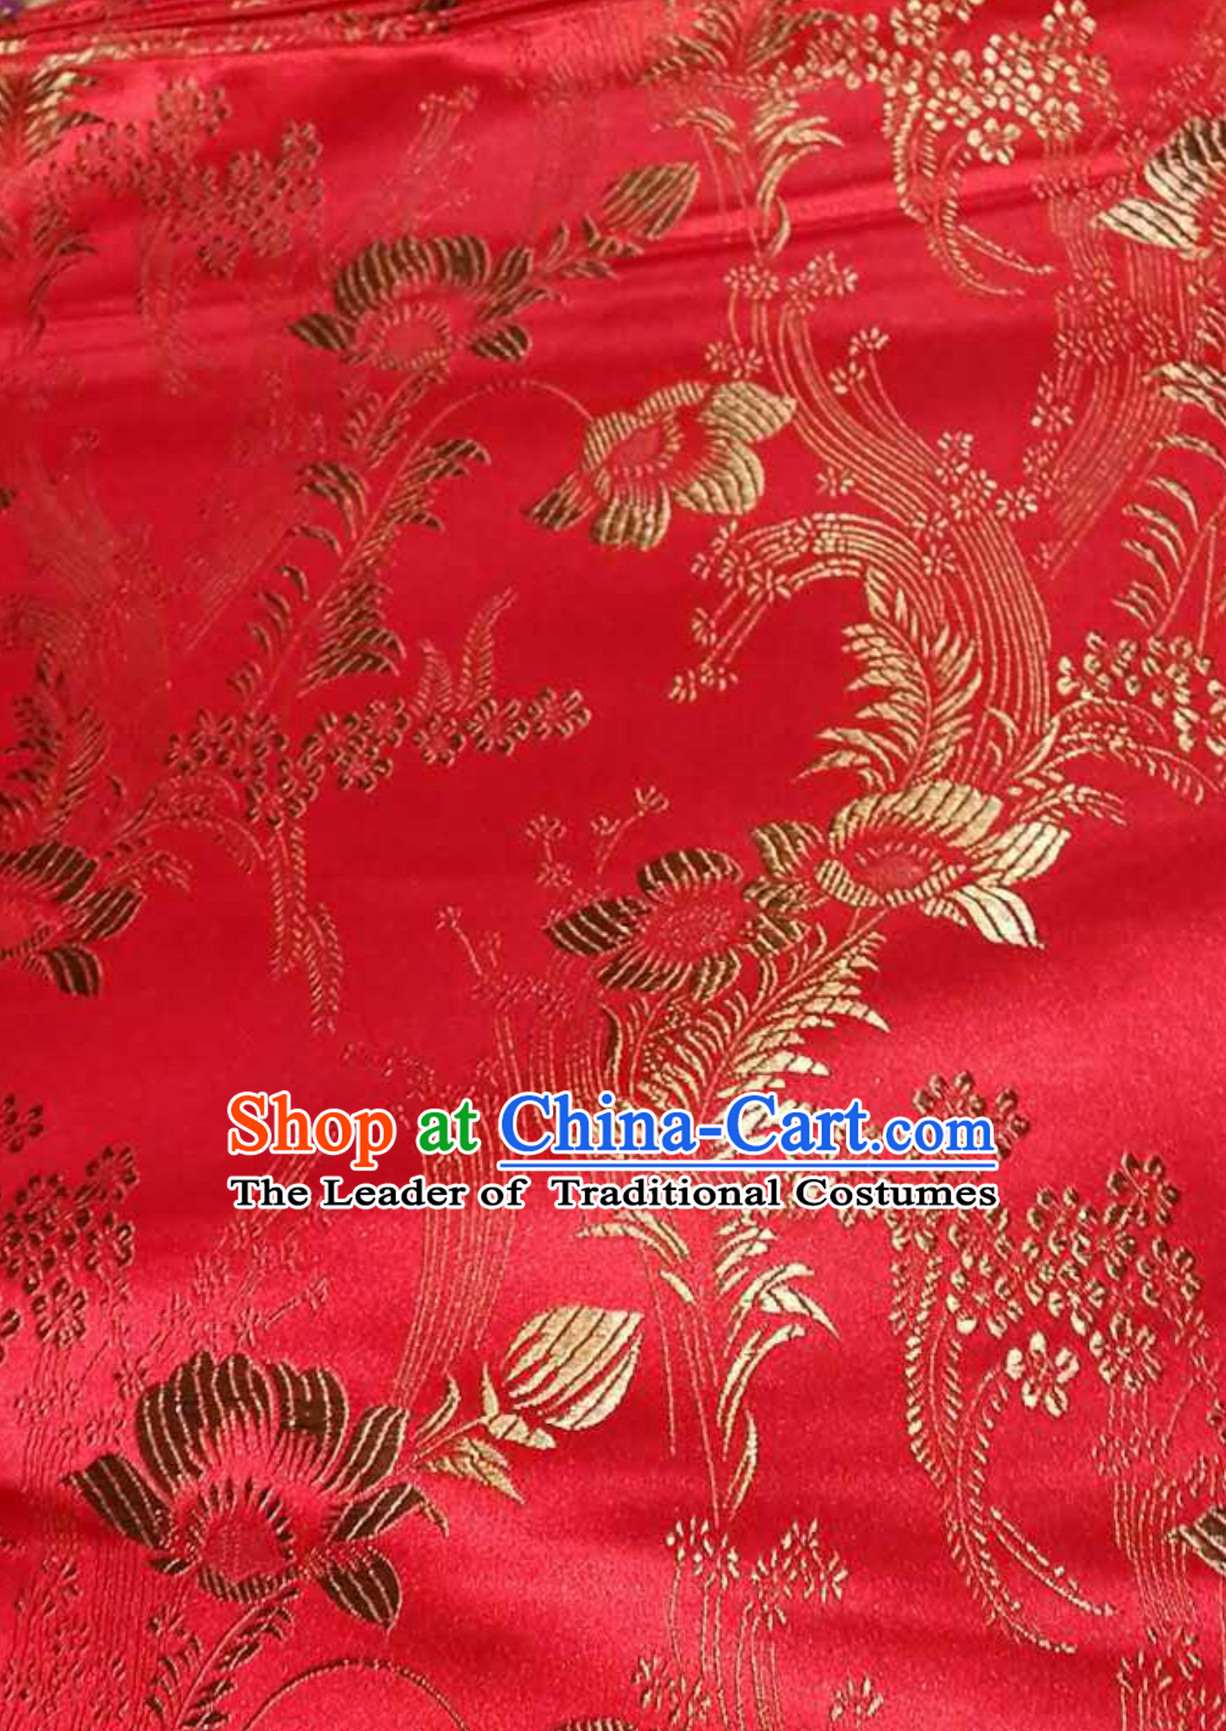 Asian Chinese Royal Palace Style Traditional Pattern Design Brocade ...